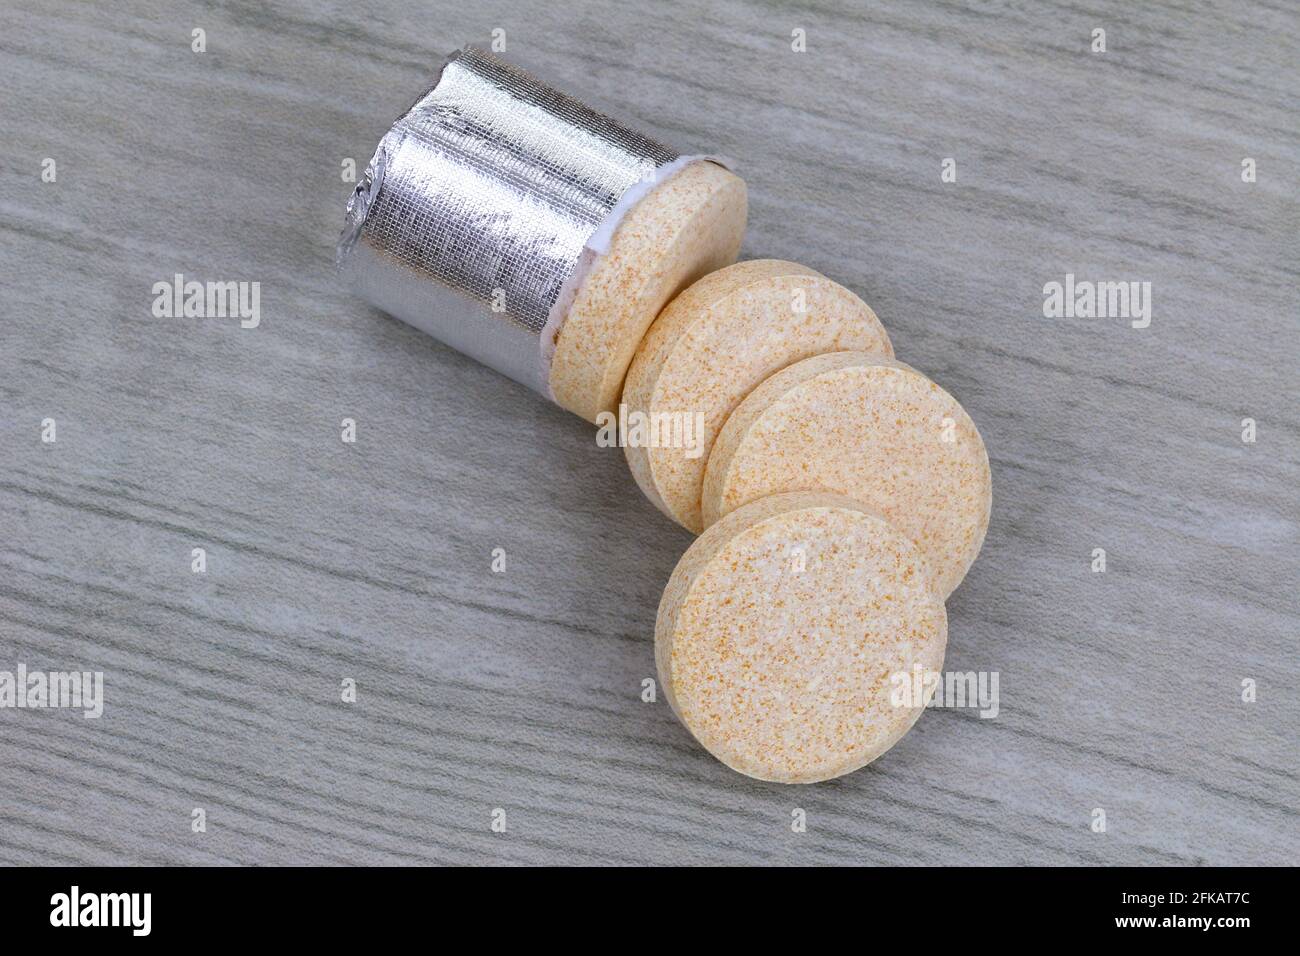 Vitamin C and Zinc - Orange flavored effervescent tablets to be dissolved in water Stock Photo